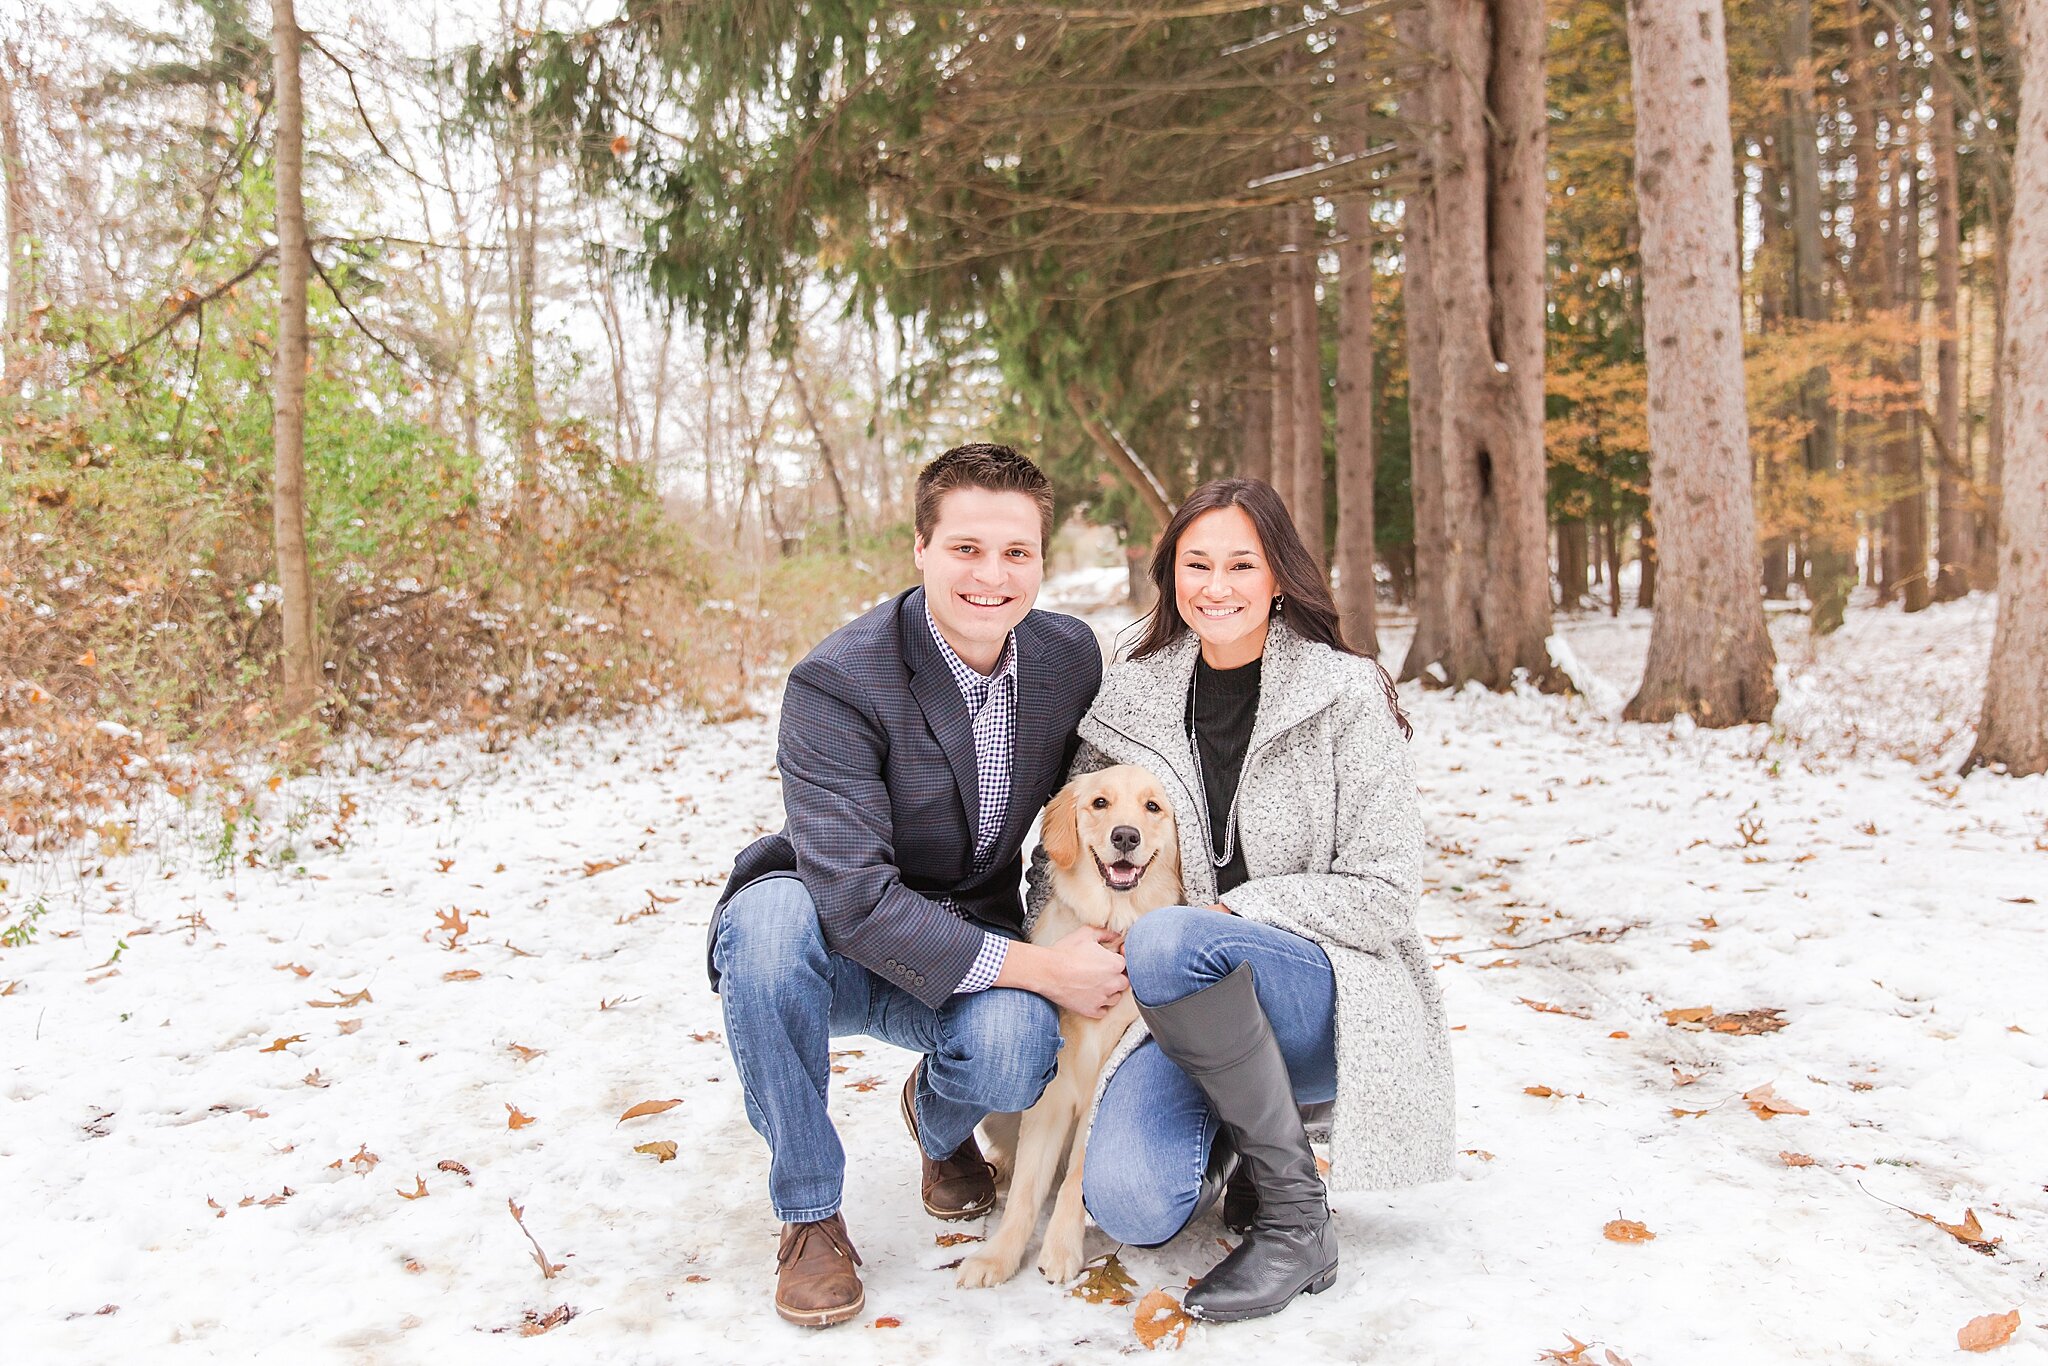 detroit-wedding-photographer-winter-engagement-photos-at-stony-creek-metropark-in-shelby-twp-mi-by-courtney-carolyn-photography_0006.jpg